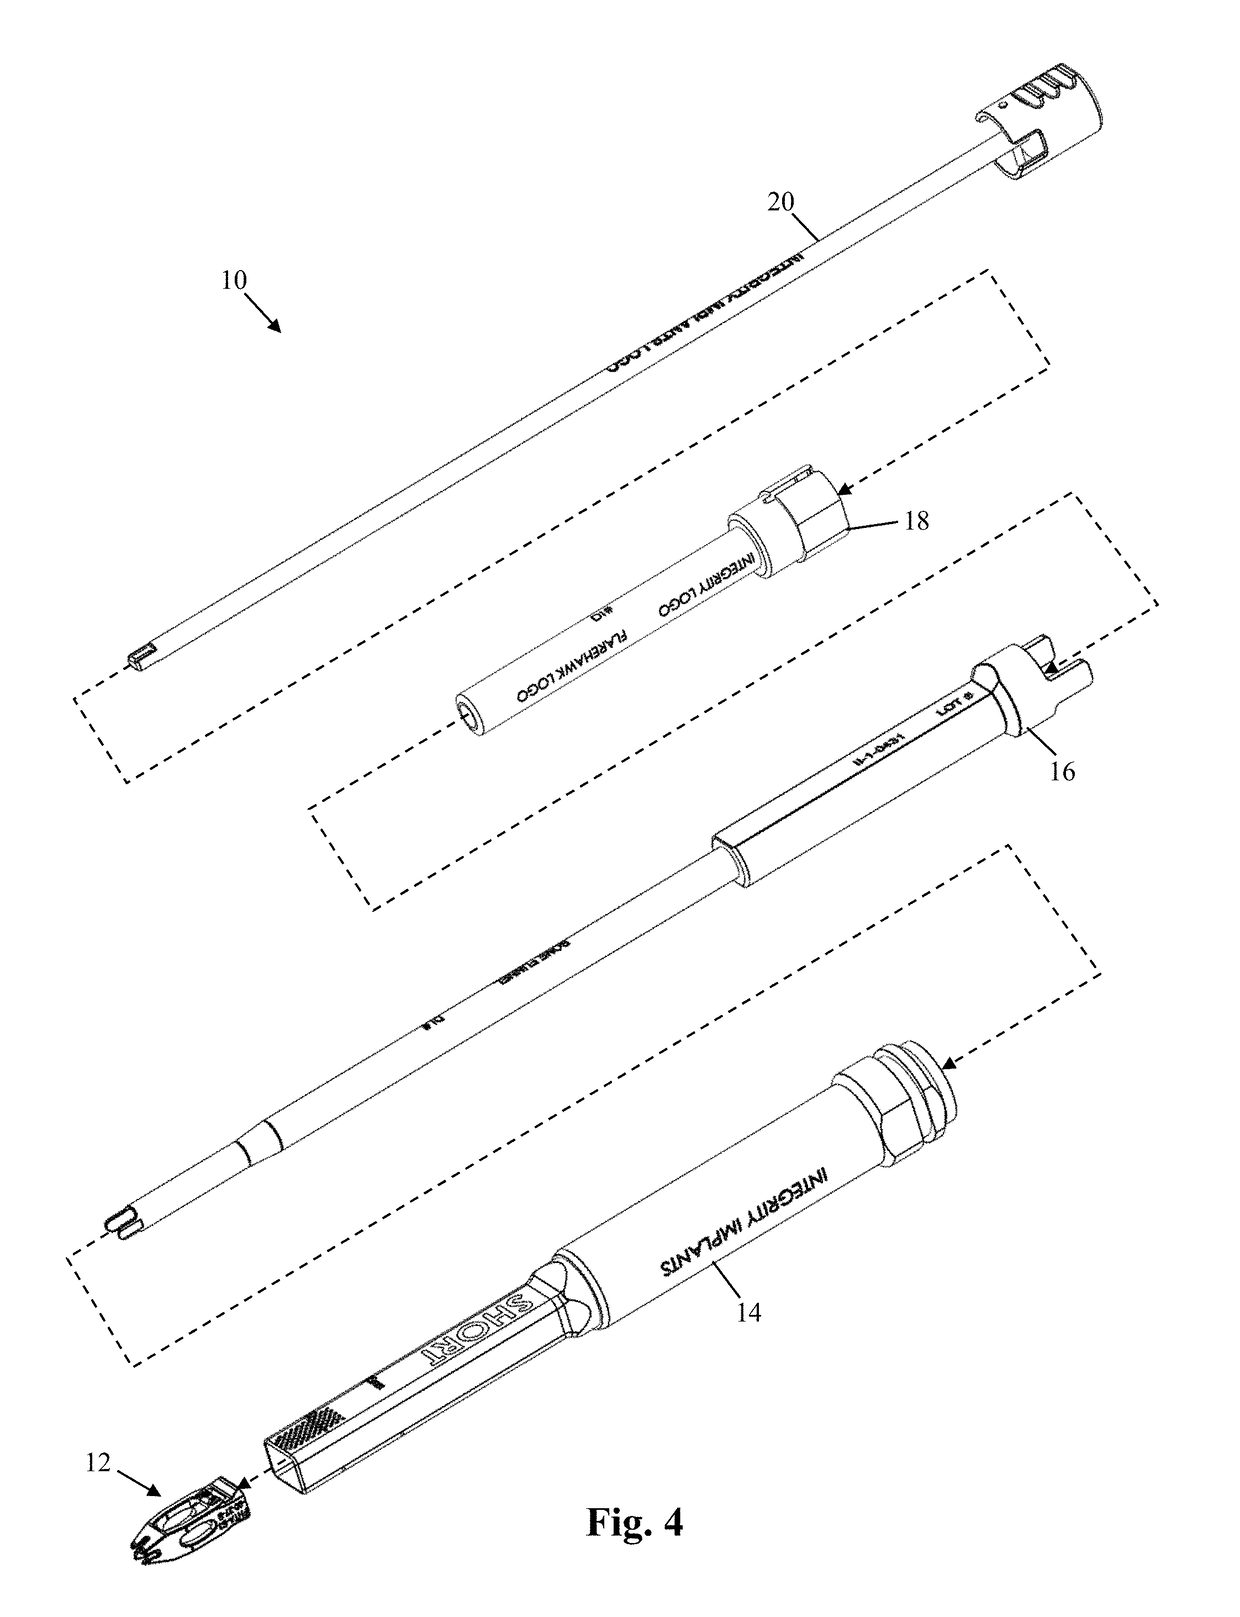 Surgical biologics delivery system and related methods